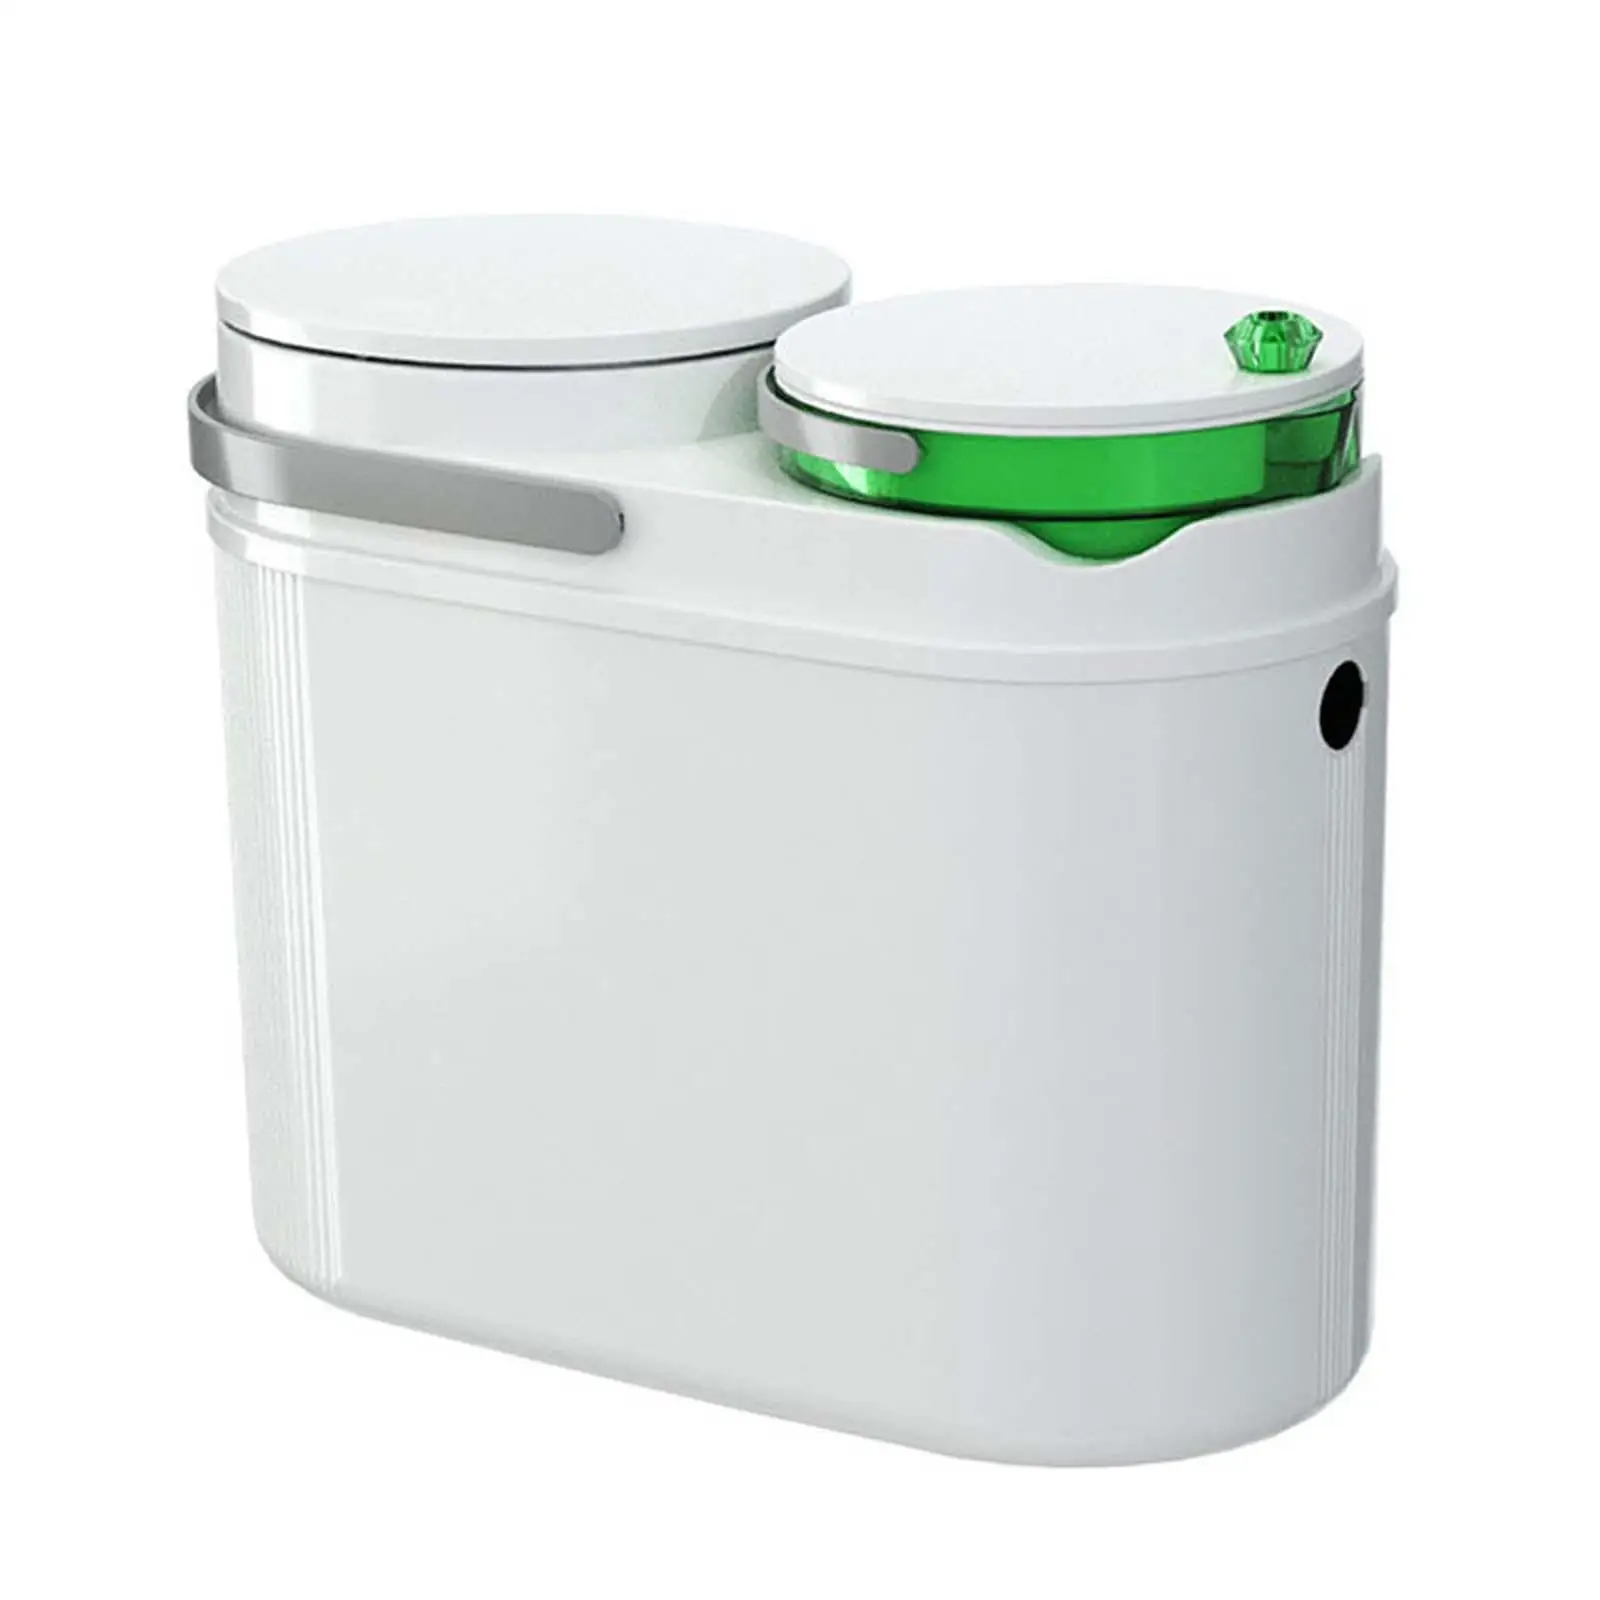 Wet and Dry Dual Trash Can Tea Capacity with Spring Lid Classified Wet and Dry Classified Rubbish Bin for Dorm Bathroom Kitchen